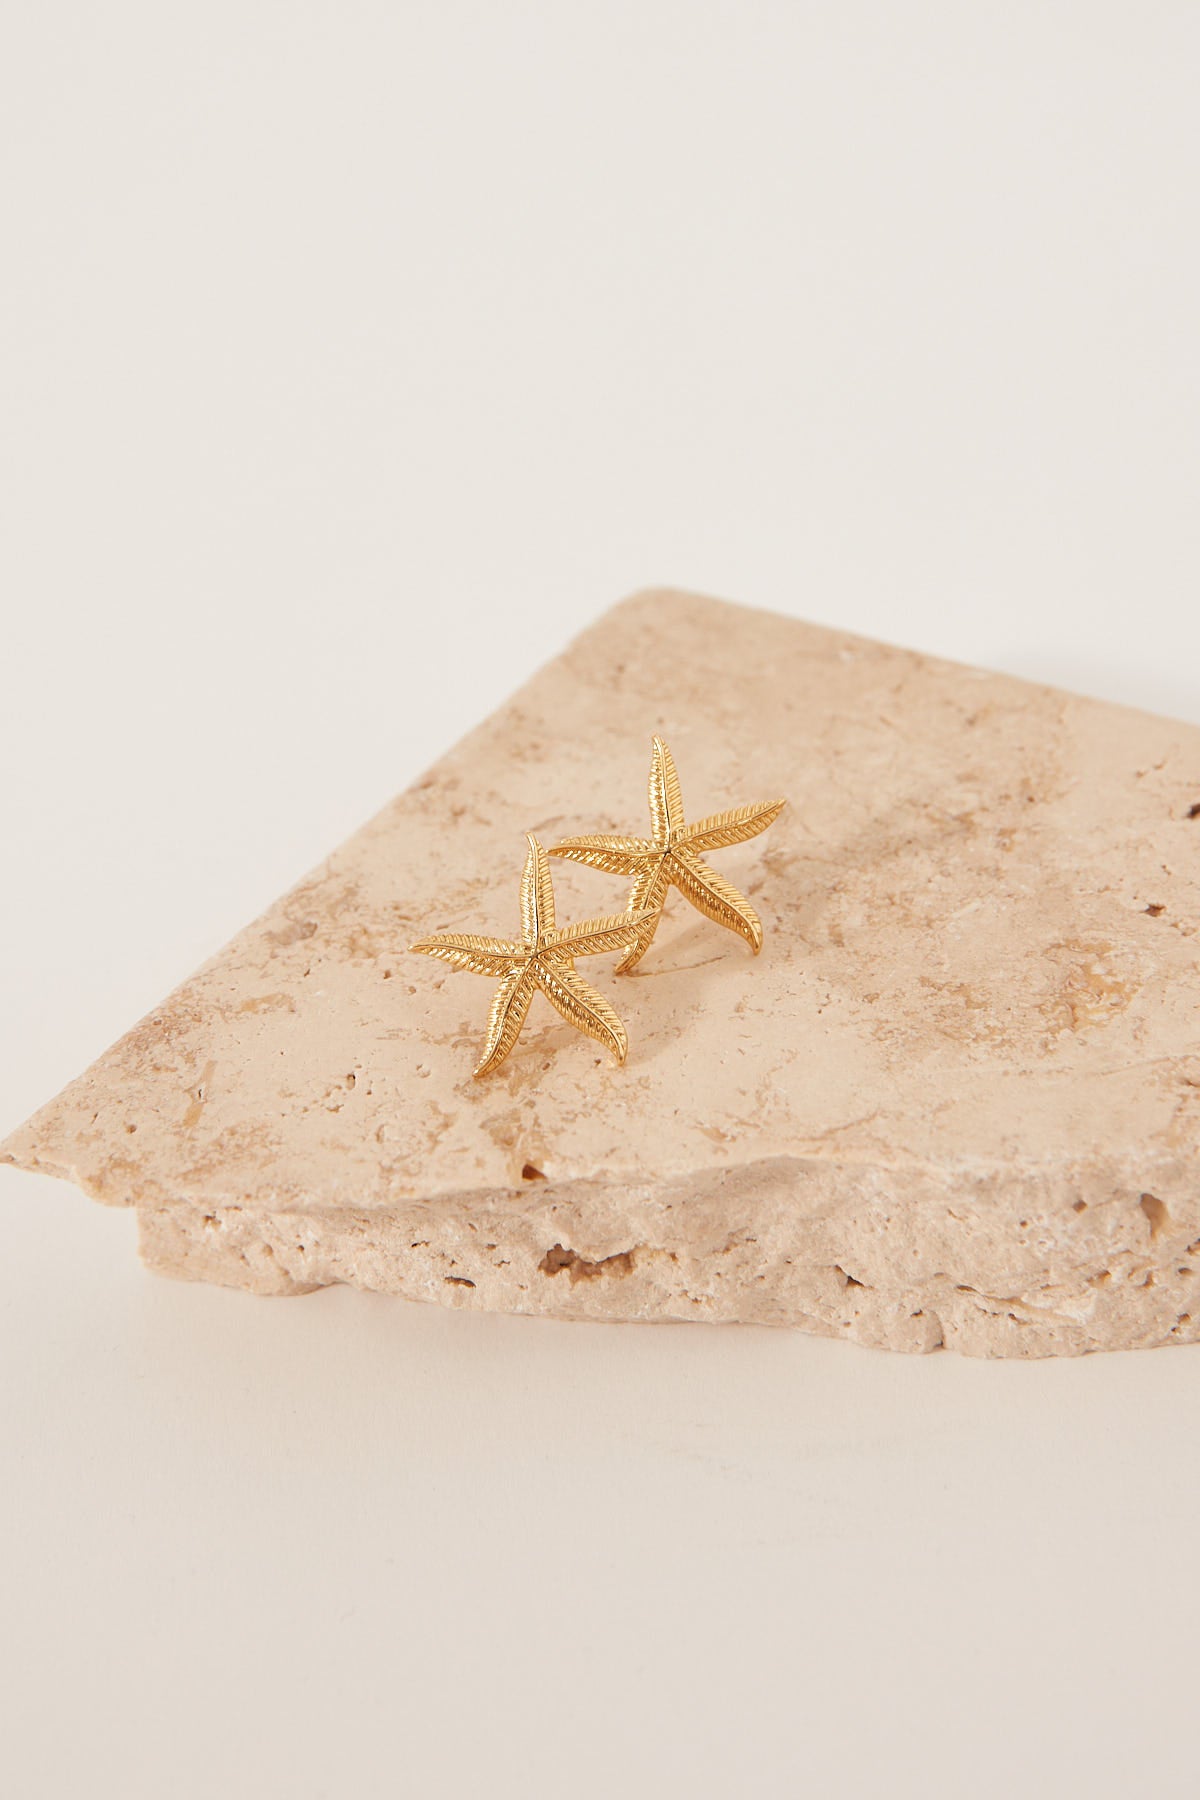 Perfect Stranger Starfish Stud Earring 18k Gold Plated 18k Gold Plated